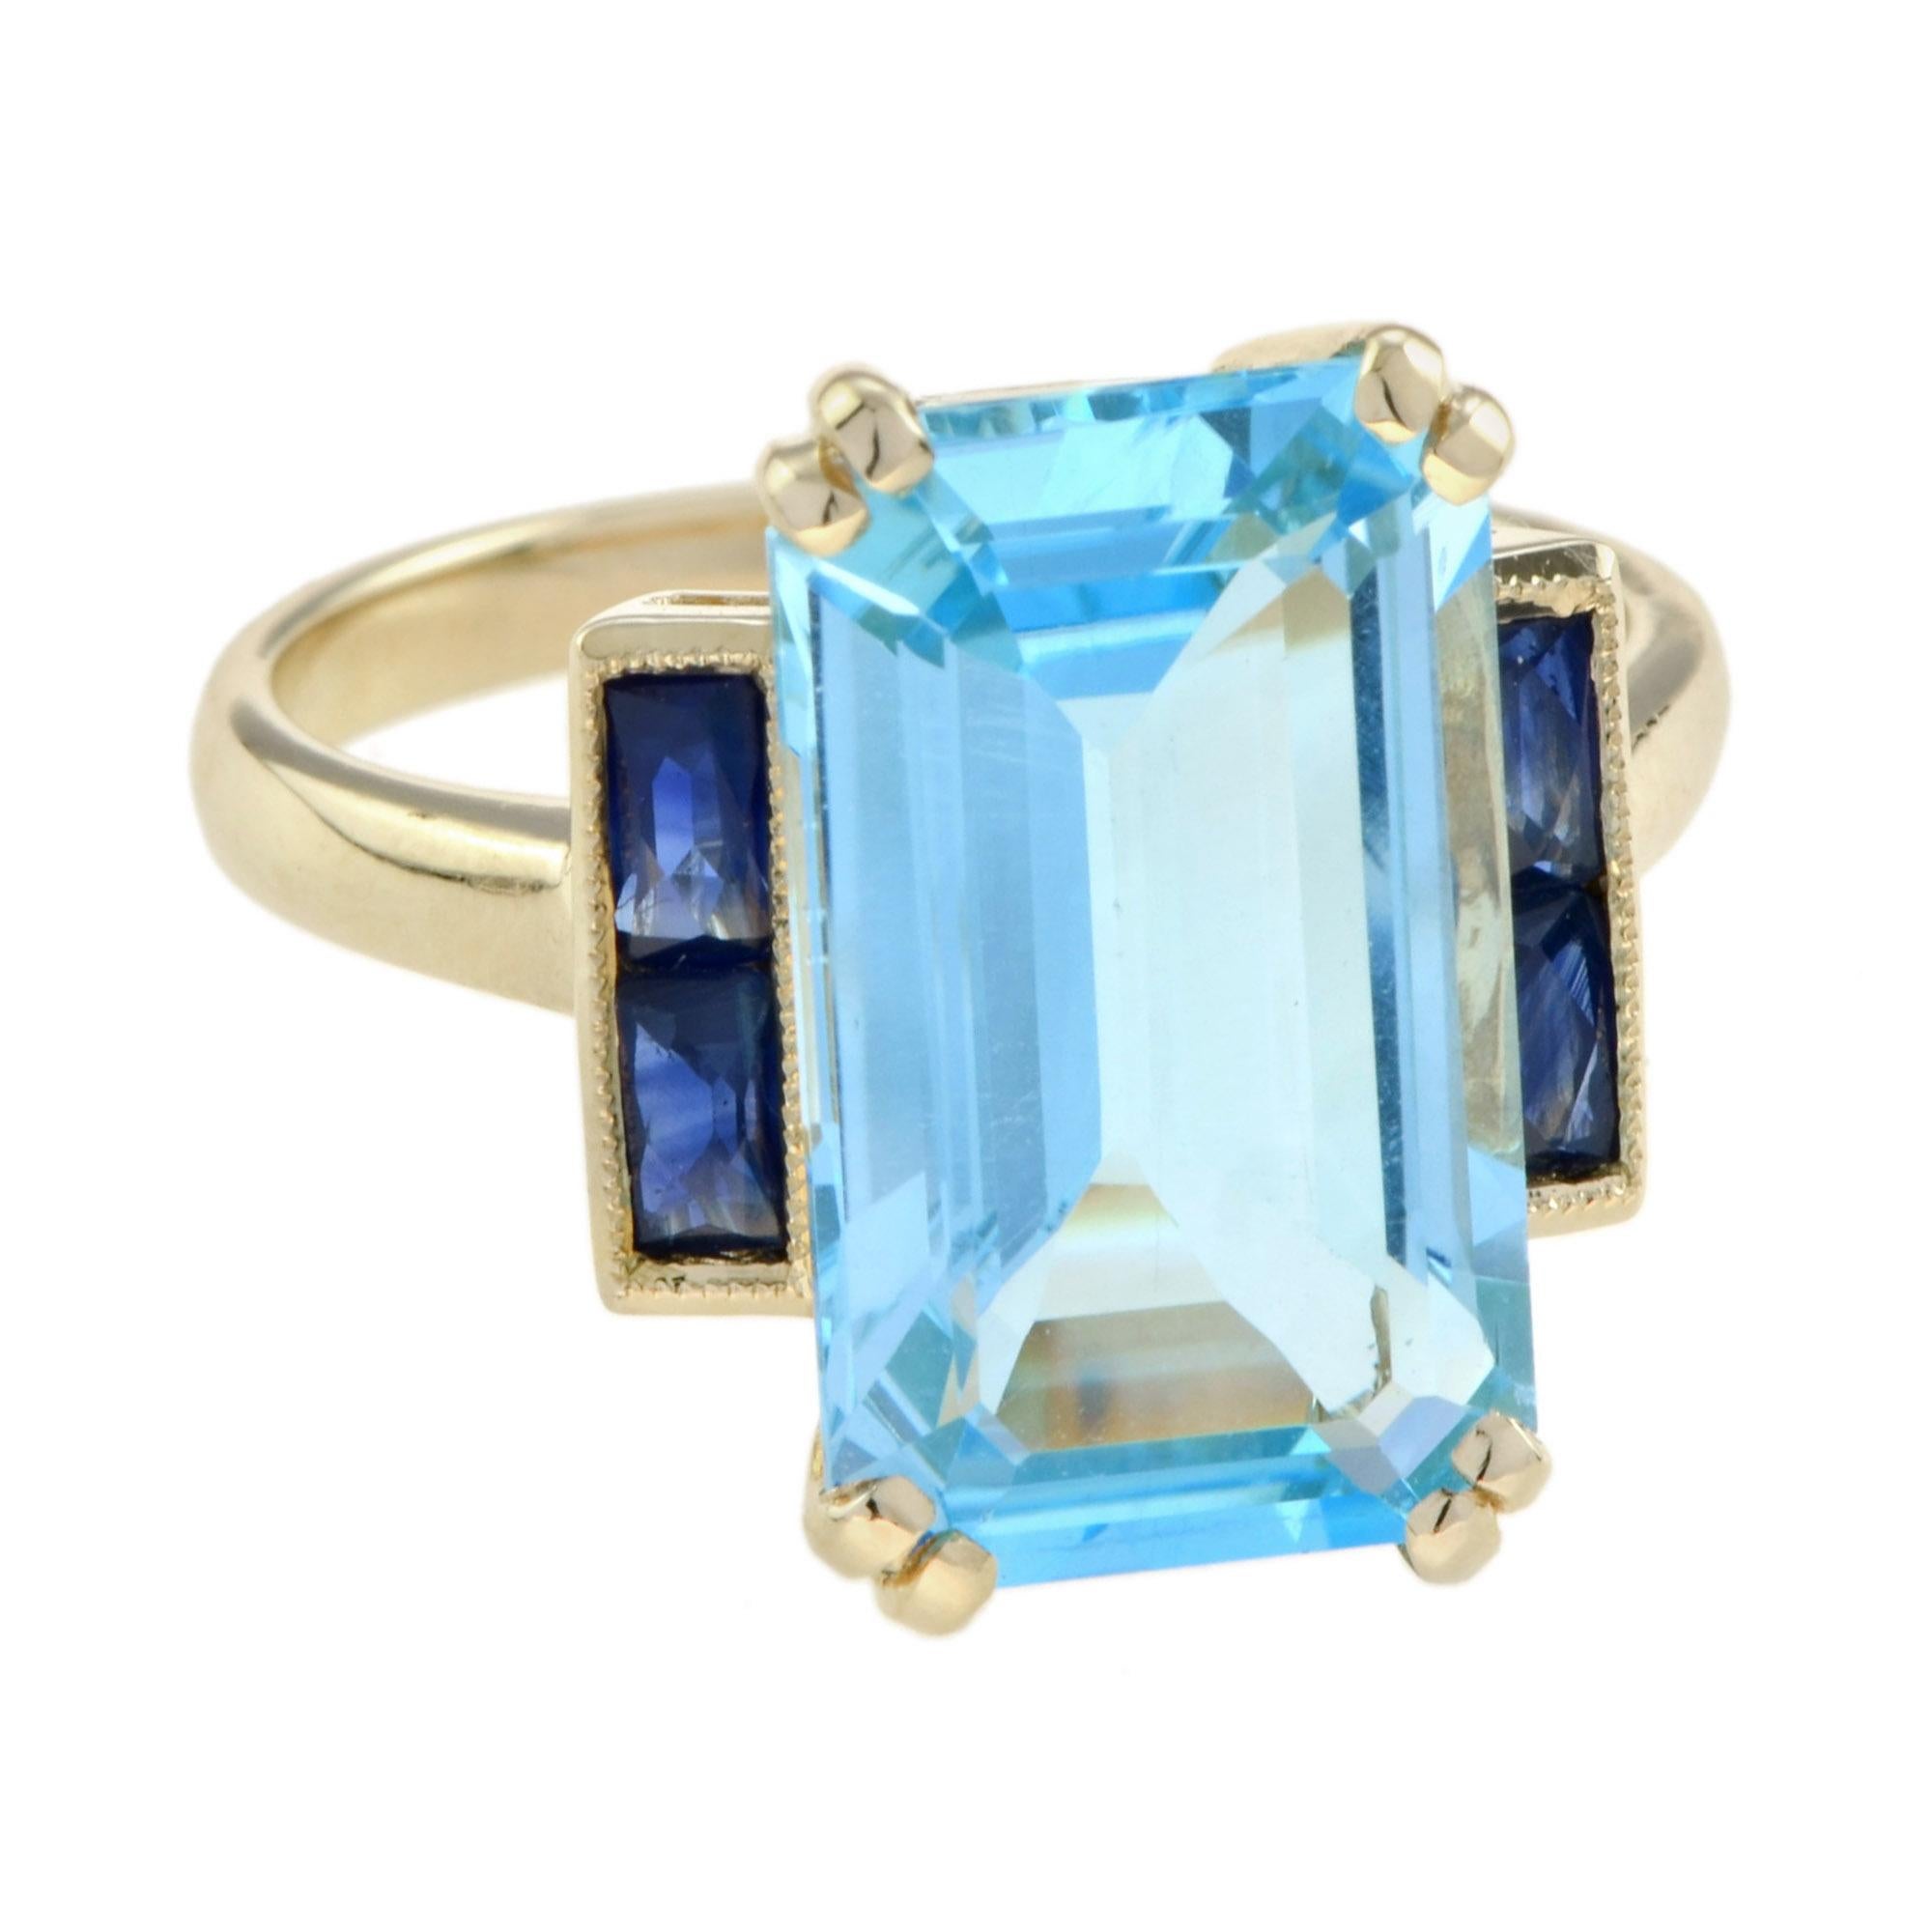 For Sale:  Emerald Cut Blue Topaz and Sapphire Art Deco Style Solitaire Ring in 14k Gold 4